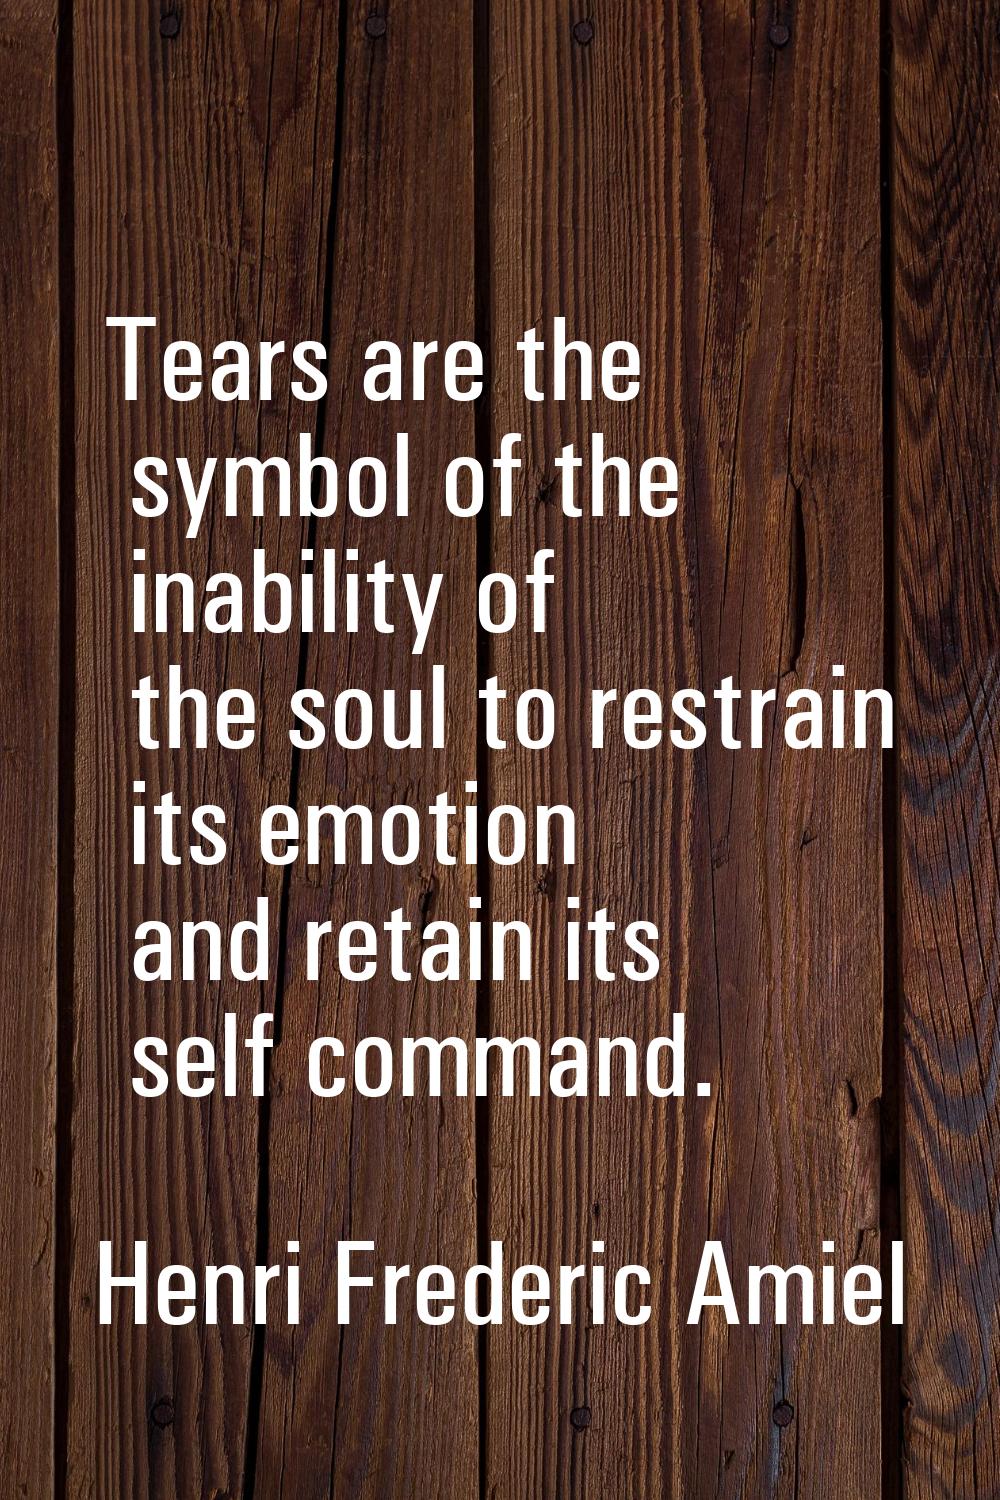 Tears are the symbol of the inability of the soul to restrain its emotion and retain its self comma